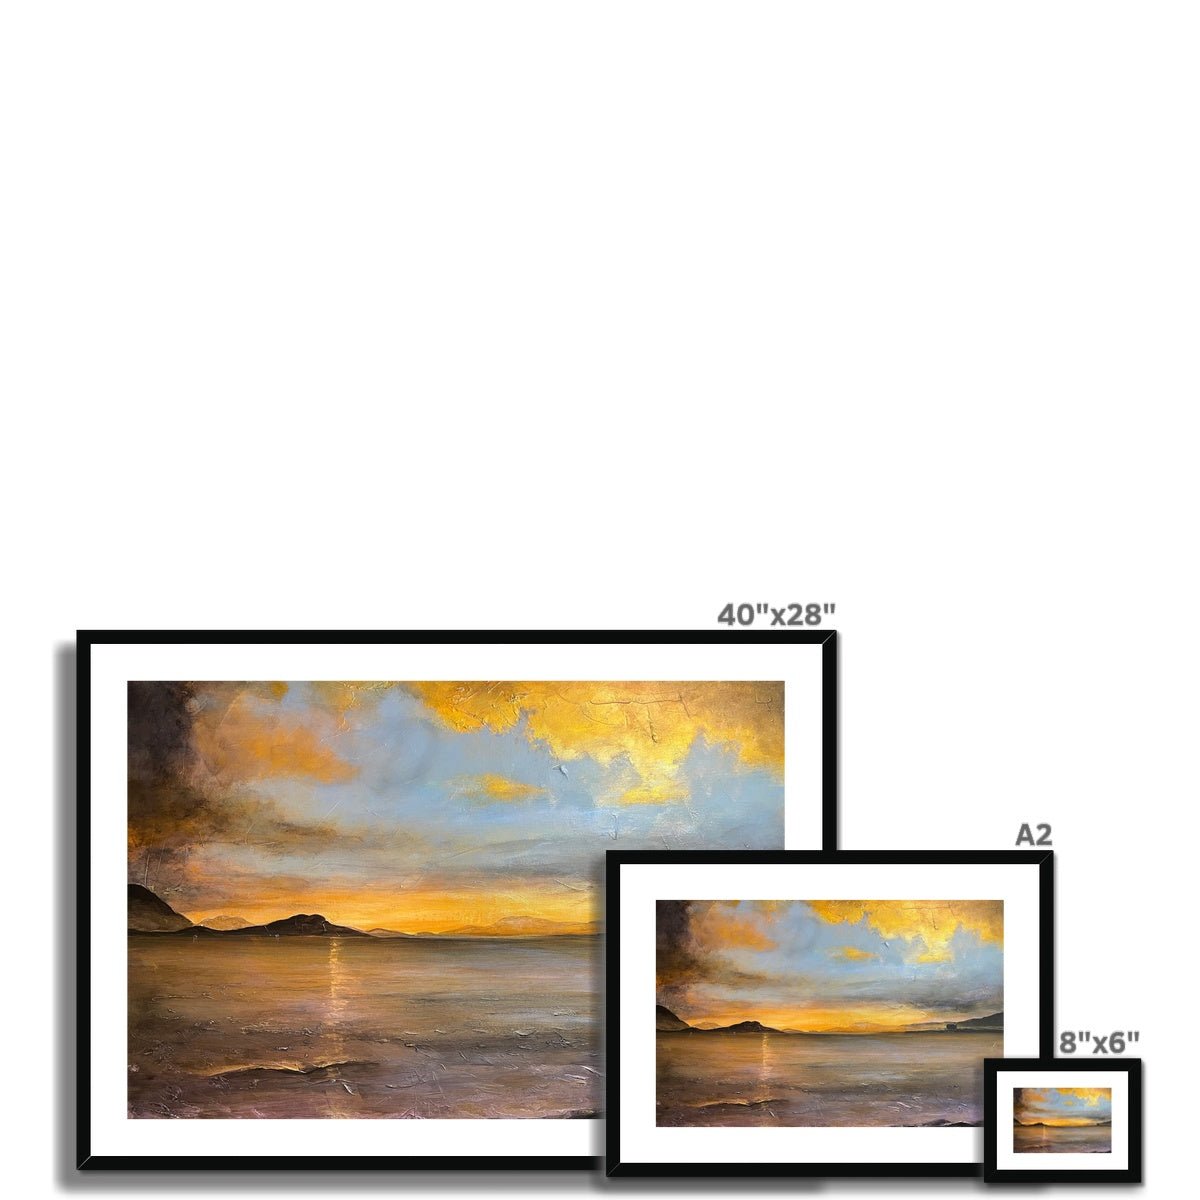 Loch Linnhe Sunset Painting | Framed & Mounted Prints From Scotland-Framed & Mounted Prints-Scottish Lochs & Mountains Art Gallery-Paintings, Prints, Homeware, Art Gifts From Scotland By Scottish Artist Kevin Hunter